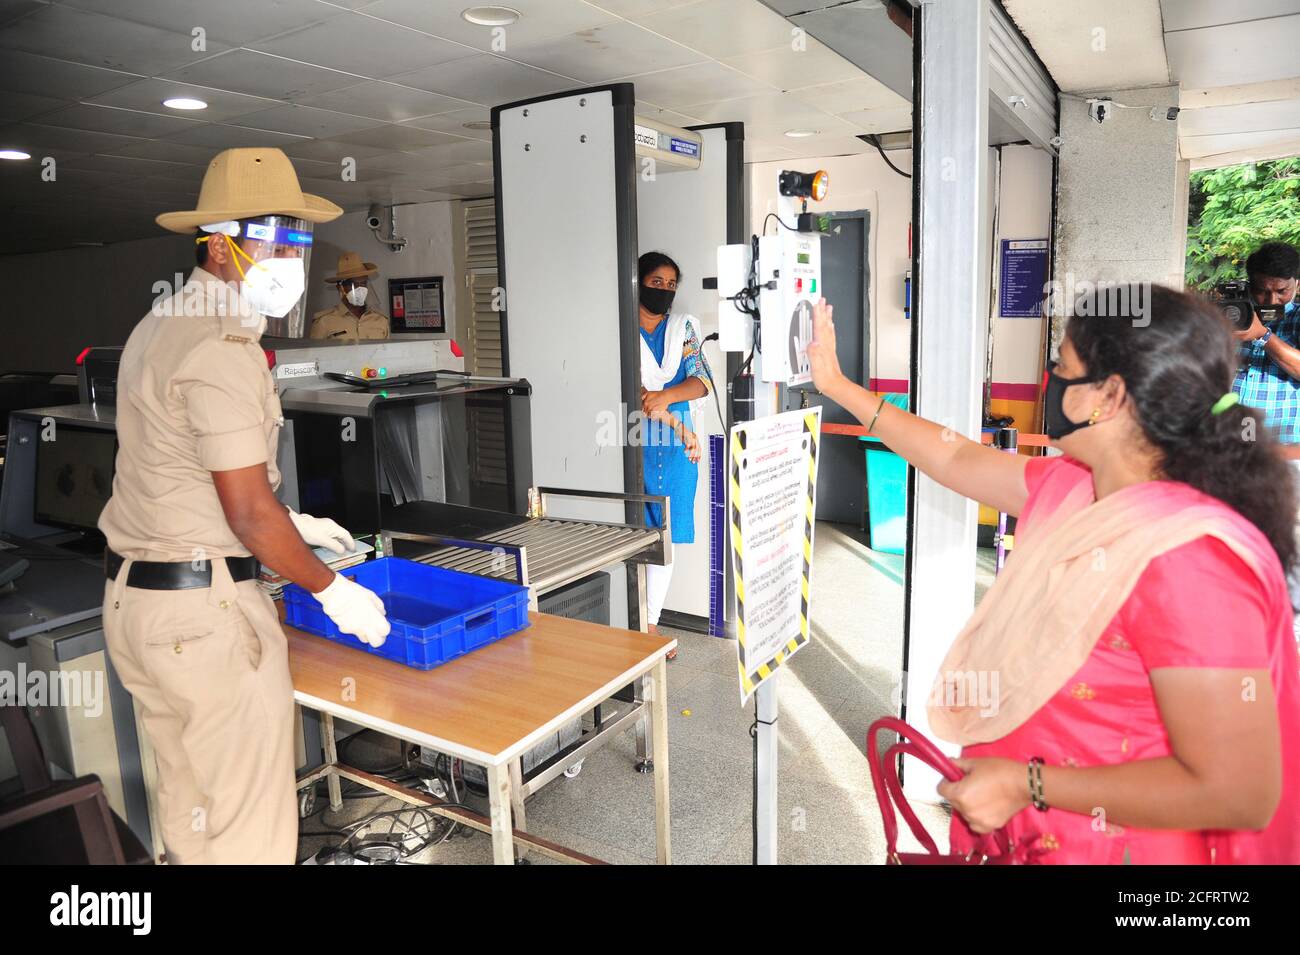 Bangalore, India. 7th Sep, 2020. Indian commuters undergo hands free thermal screening at a metro train station in Bangalore, India, Sept. 7, 2020. Metro rail services resumed Monday morning in different cities across India after a gap of over five months, officials said. Credit: Str/Xinhua/Alamy Live News Stock Photo